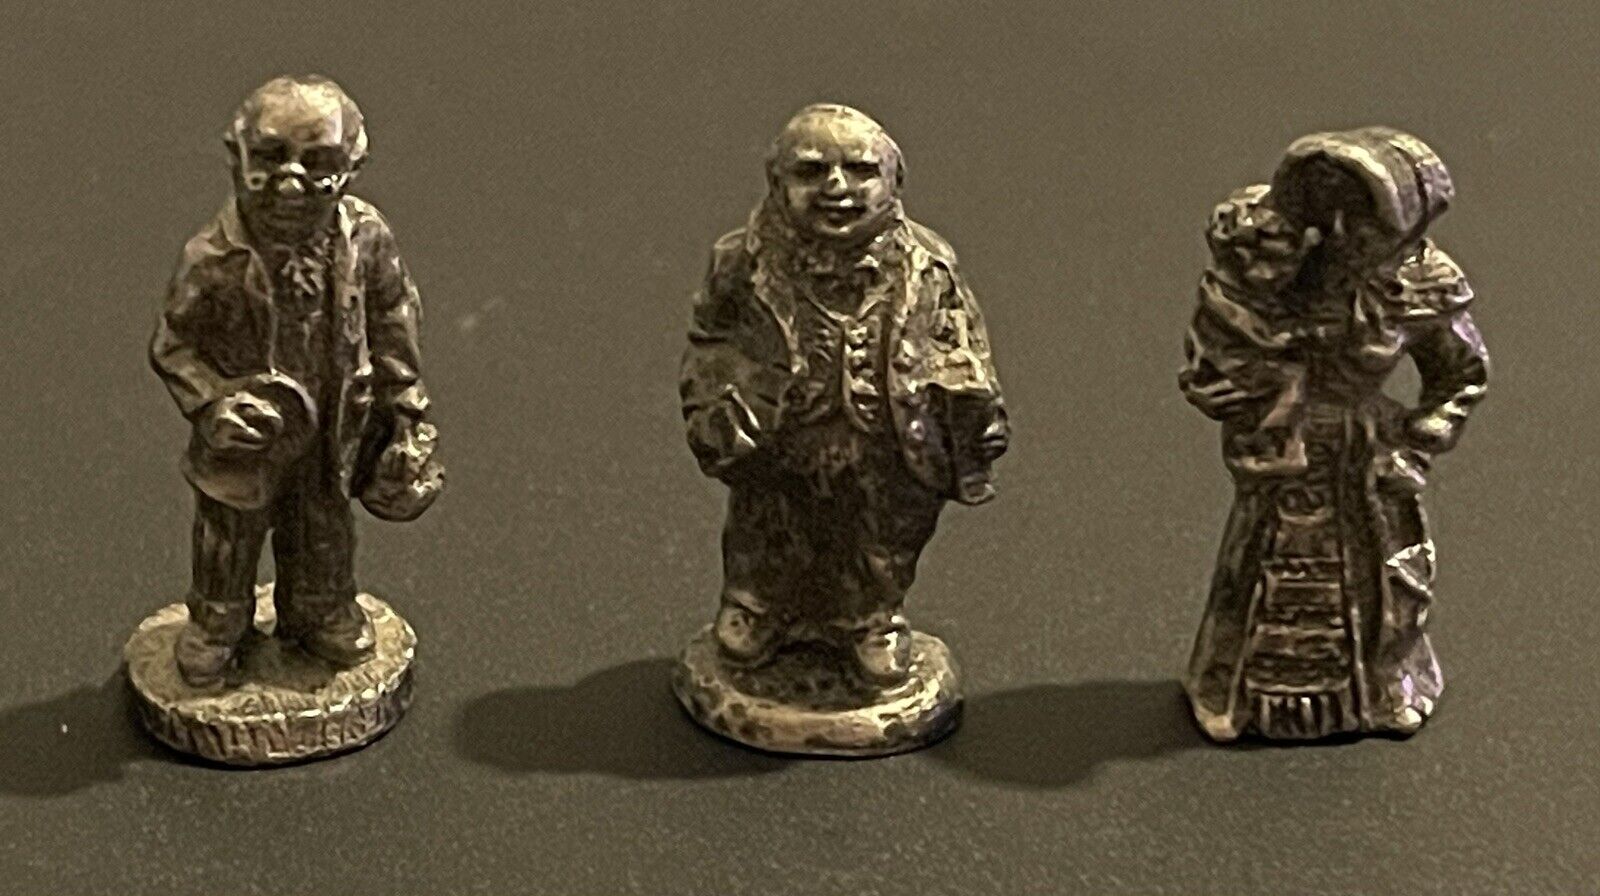 \'94 I.R.S. Pewter Set China Vintage Collectible Miniatures (Lot of 3)